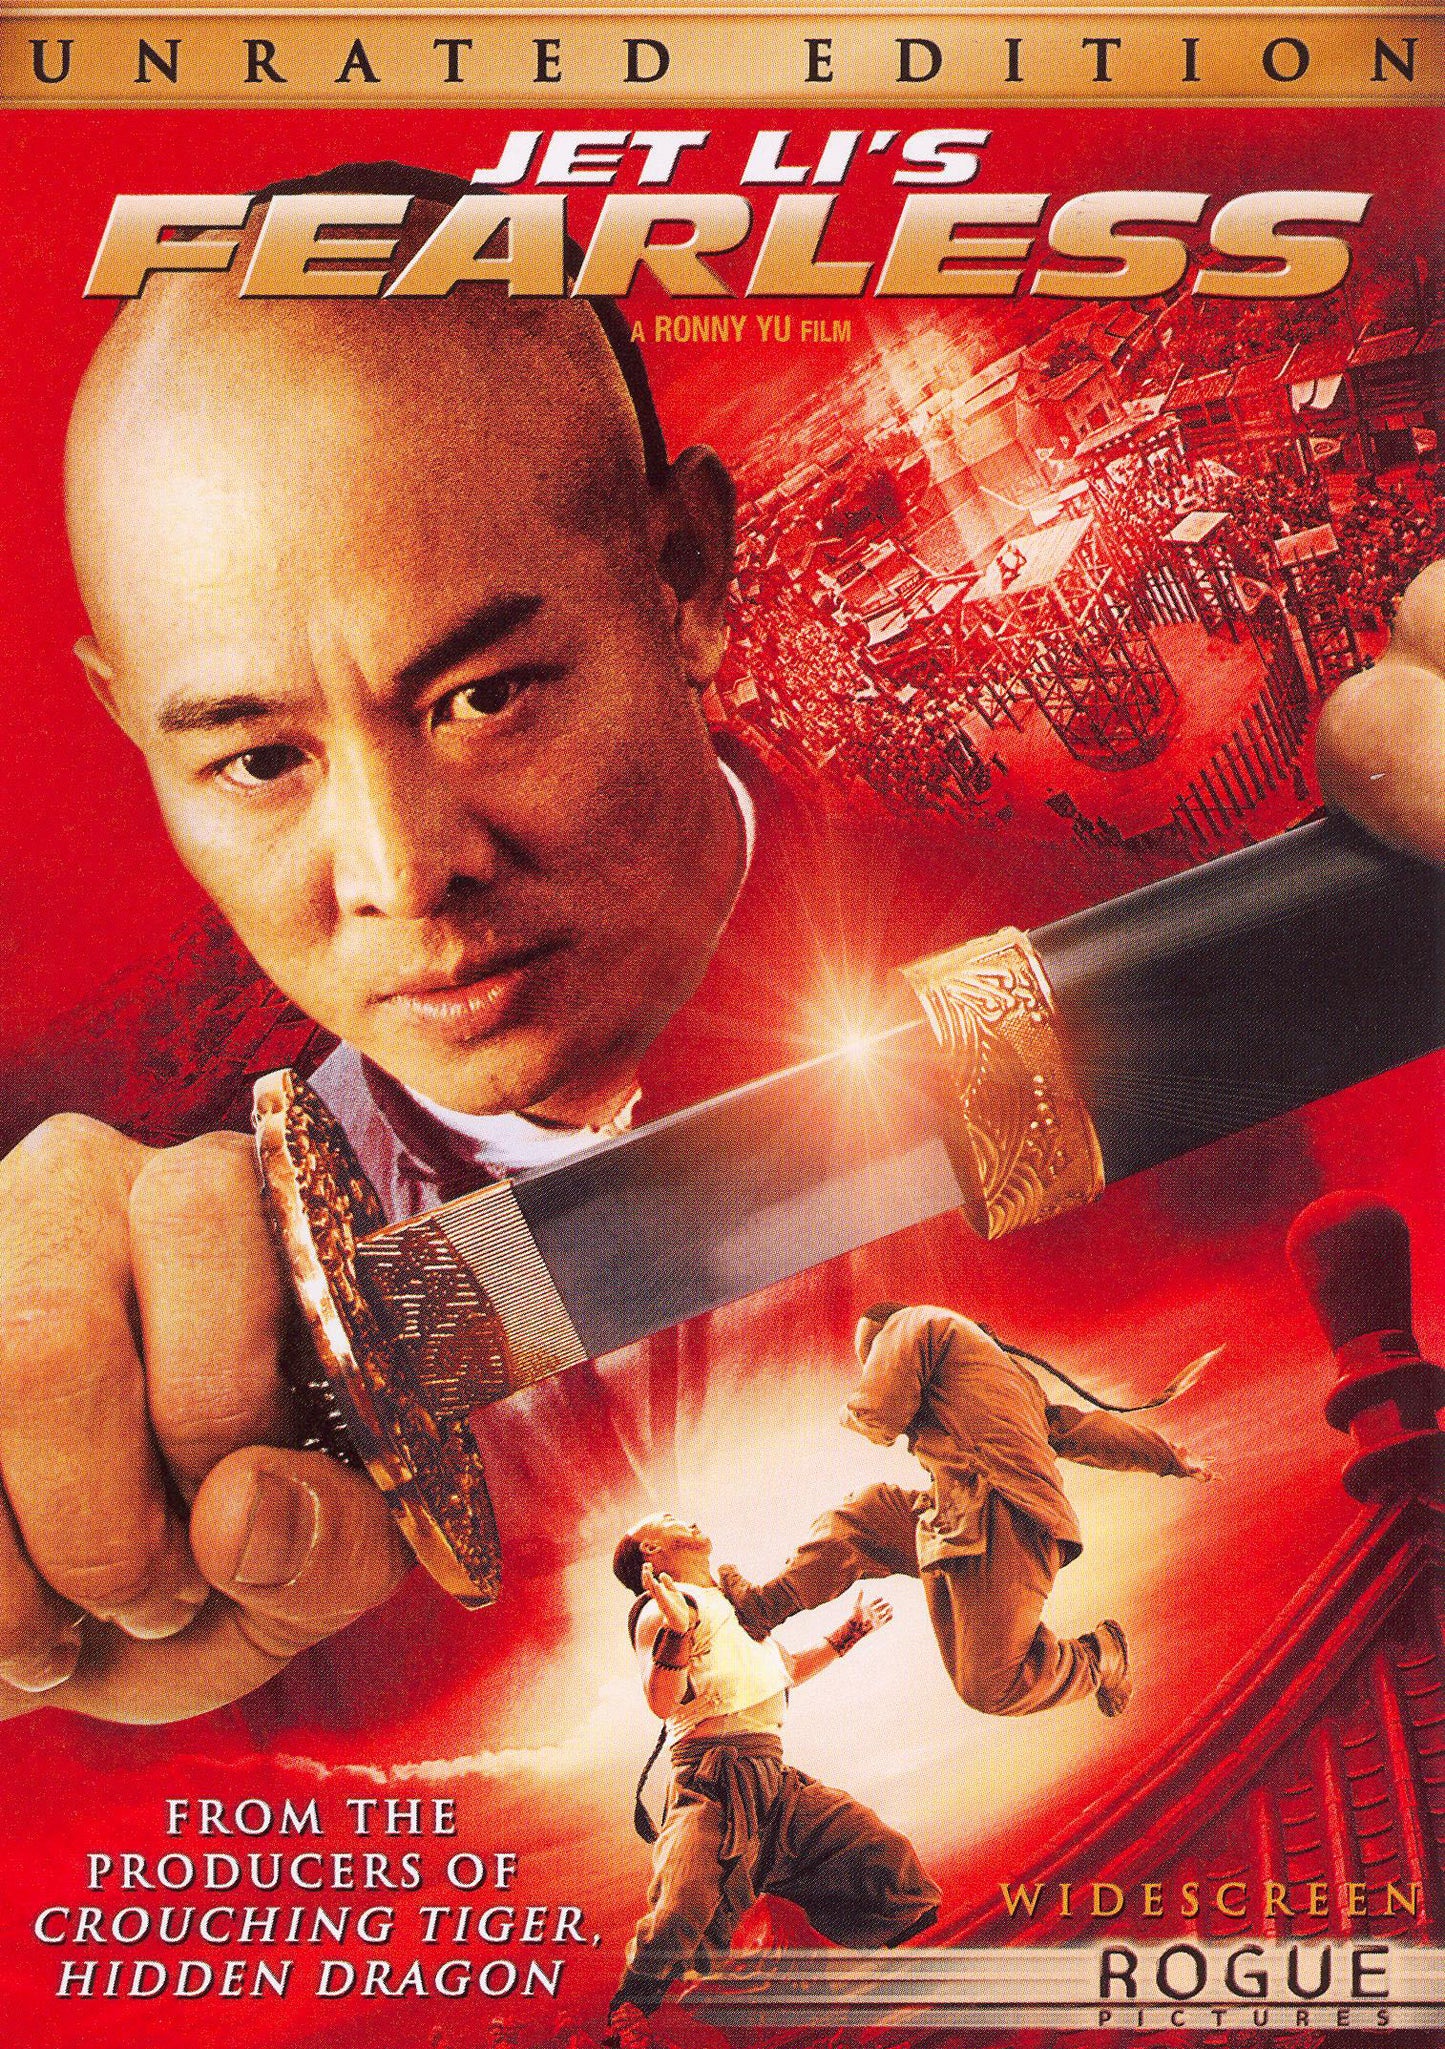 Jet Li's Fearless [WS] [Unrated/Theatrical] cover art